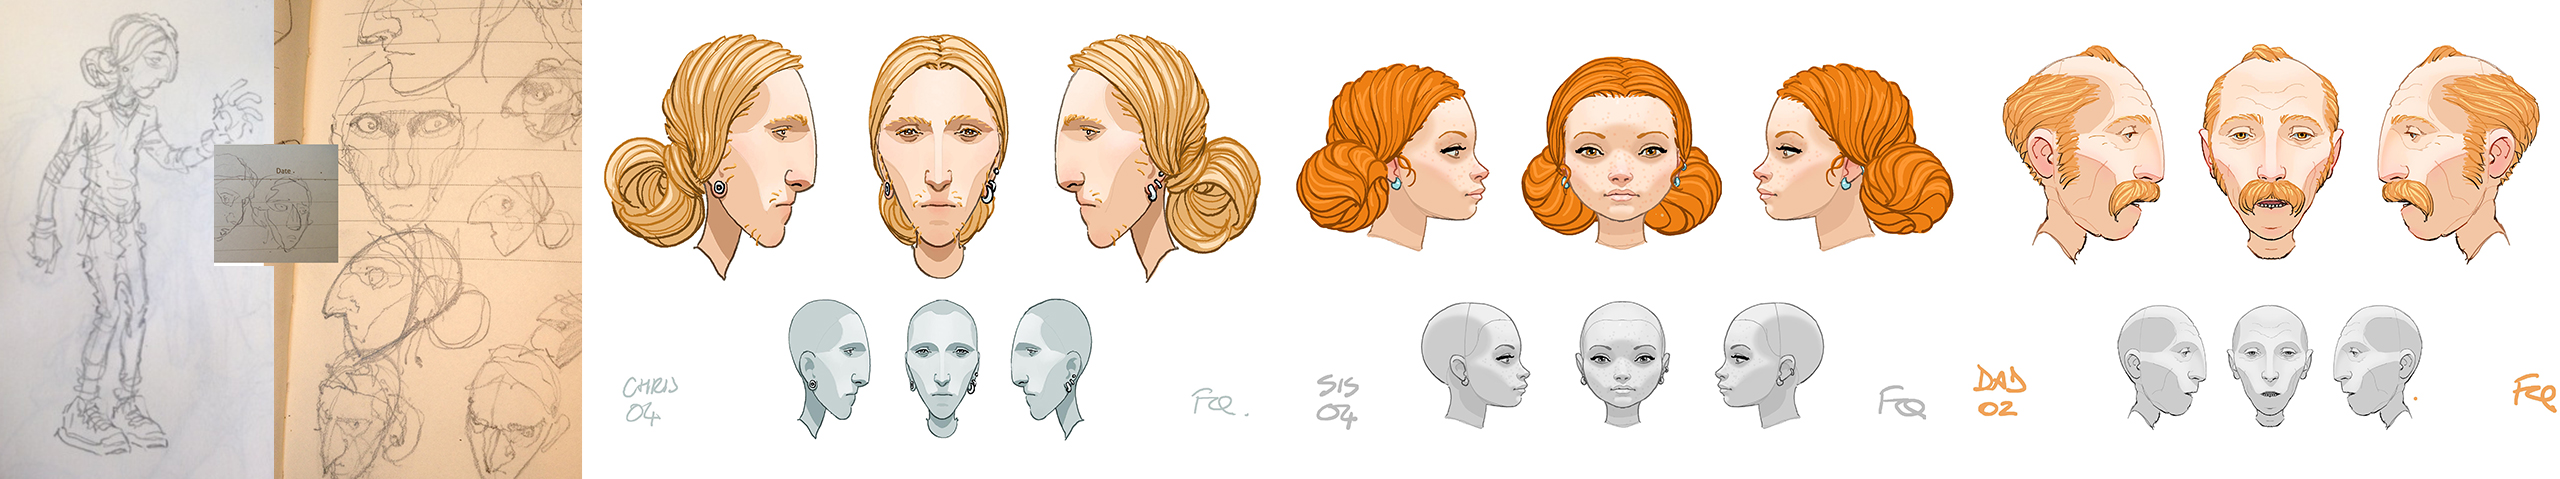 Designs for some of the film's characters.